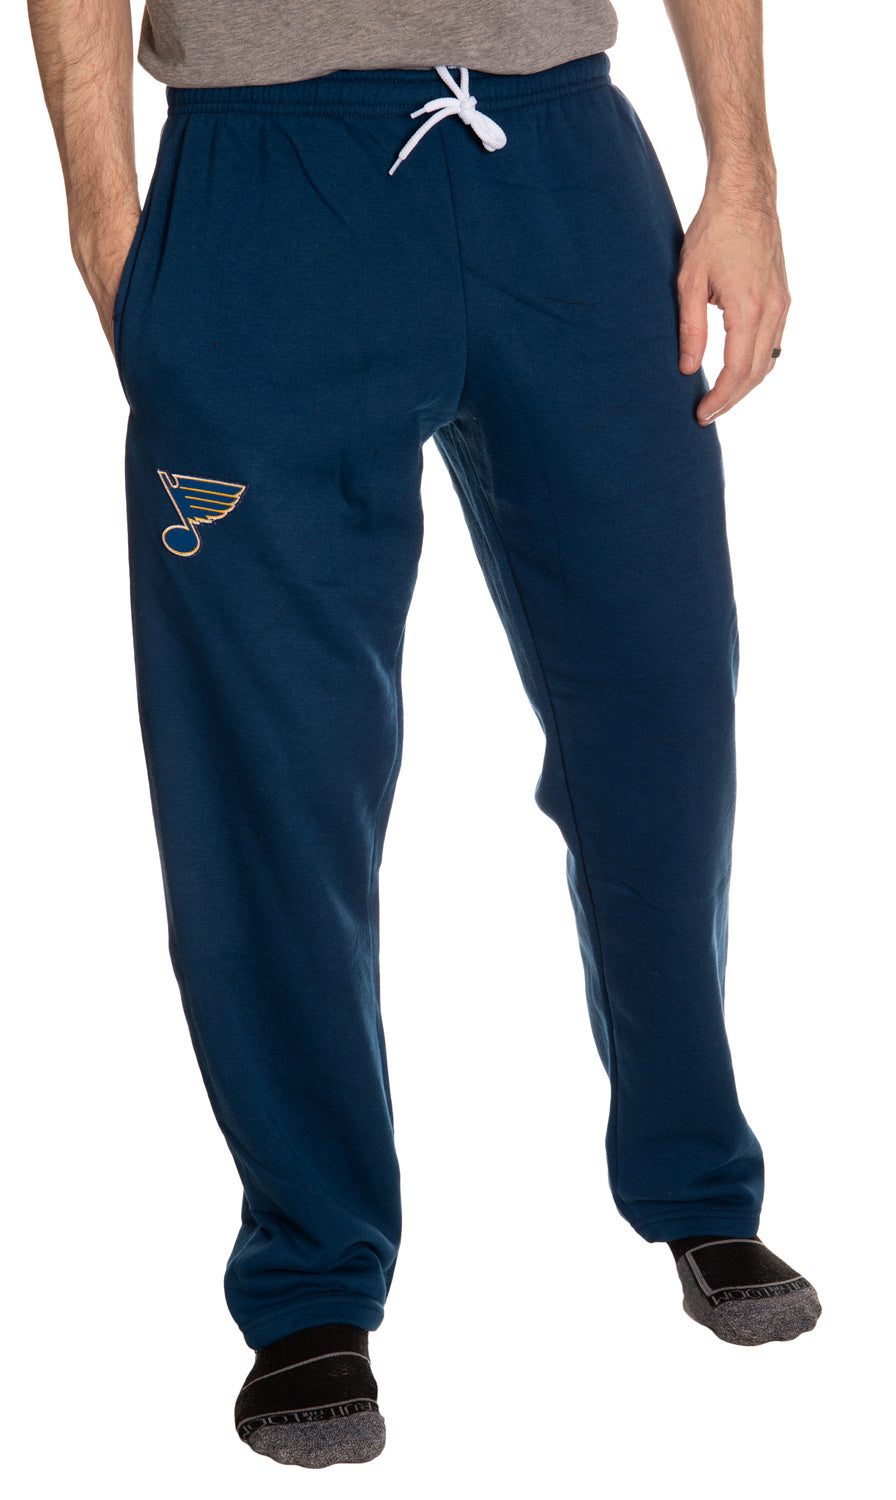 St. Louis Blues Embroidered Logo Sweatpants Front View